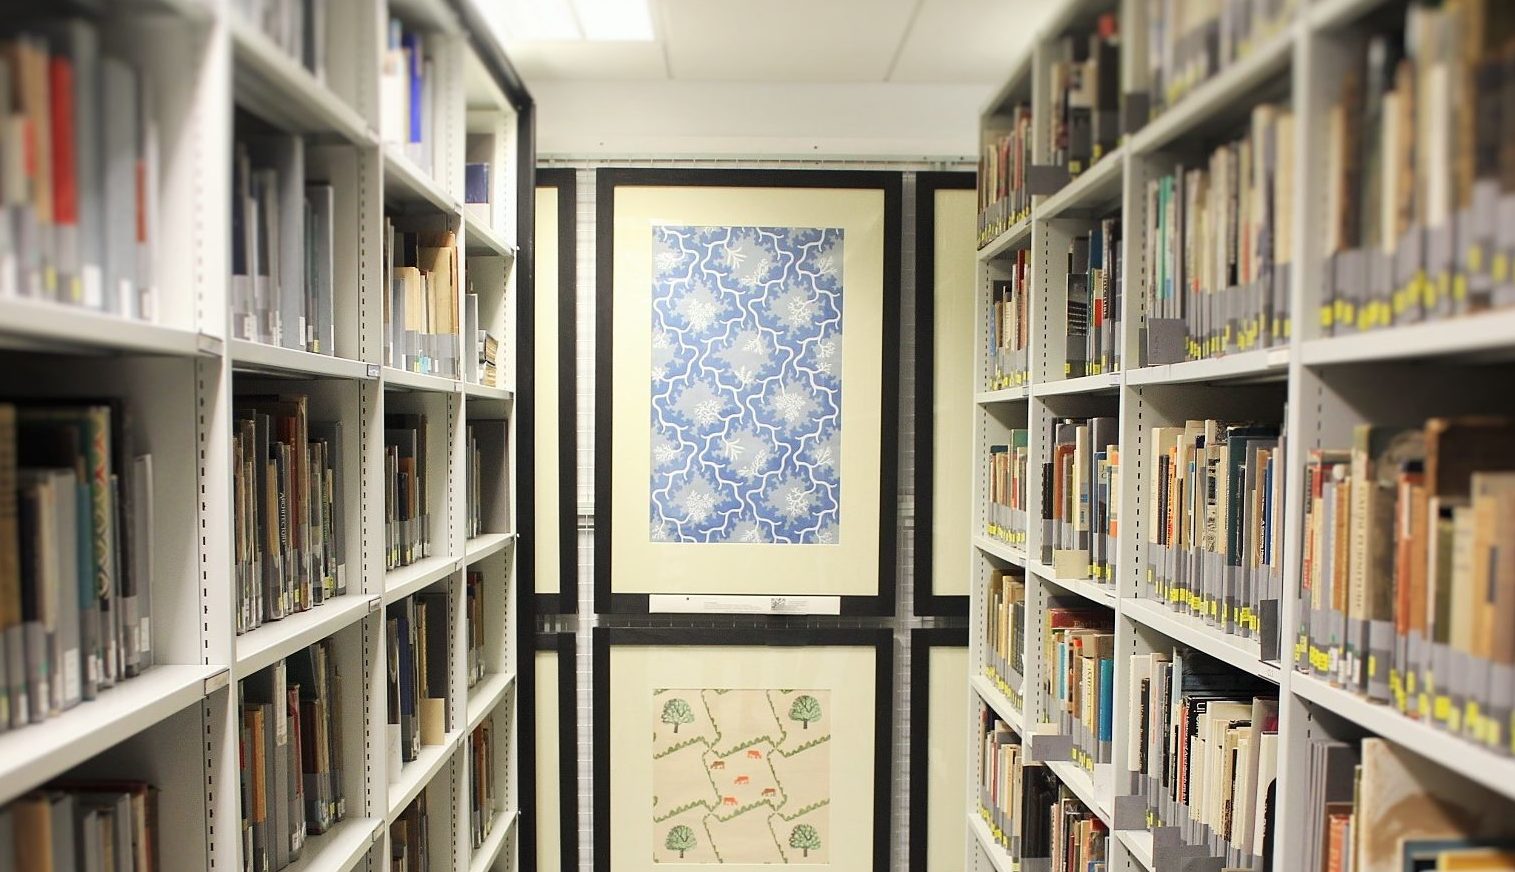 Shelving, books and framed wallpapers in the MoDA collection store